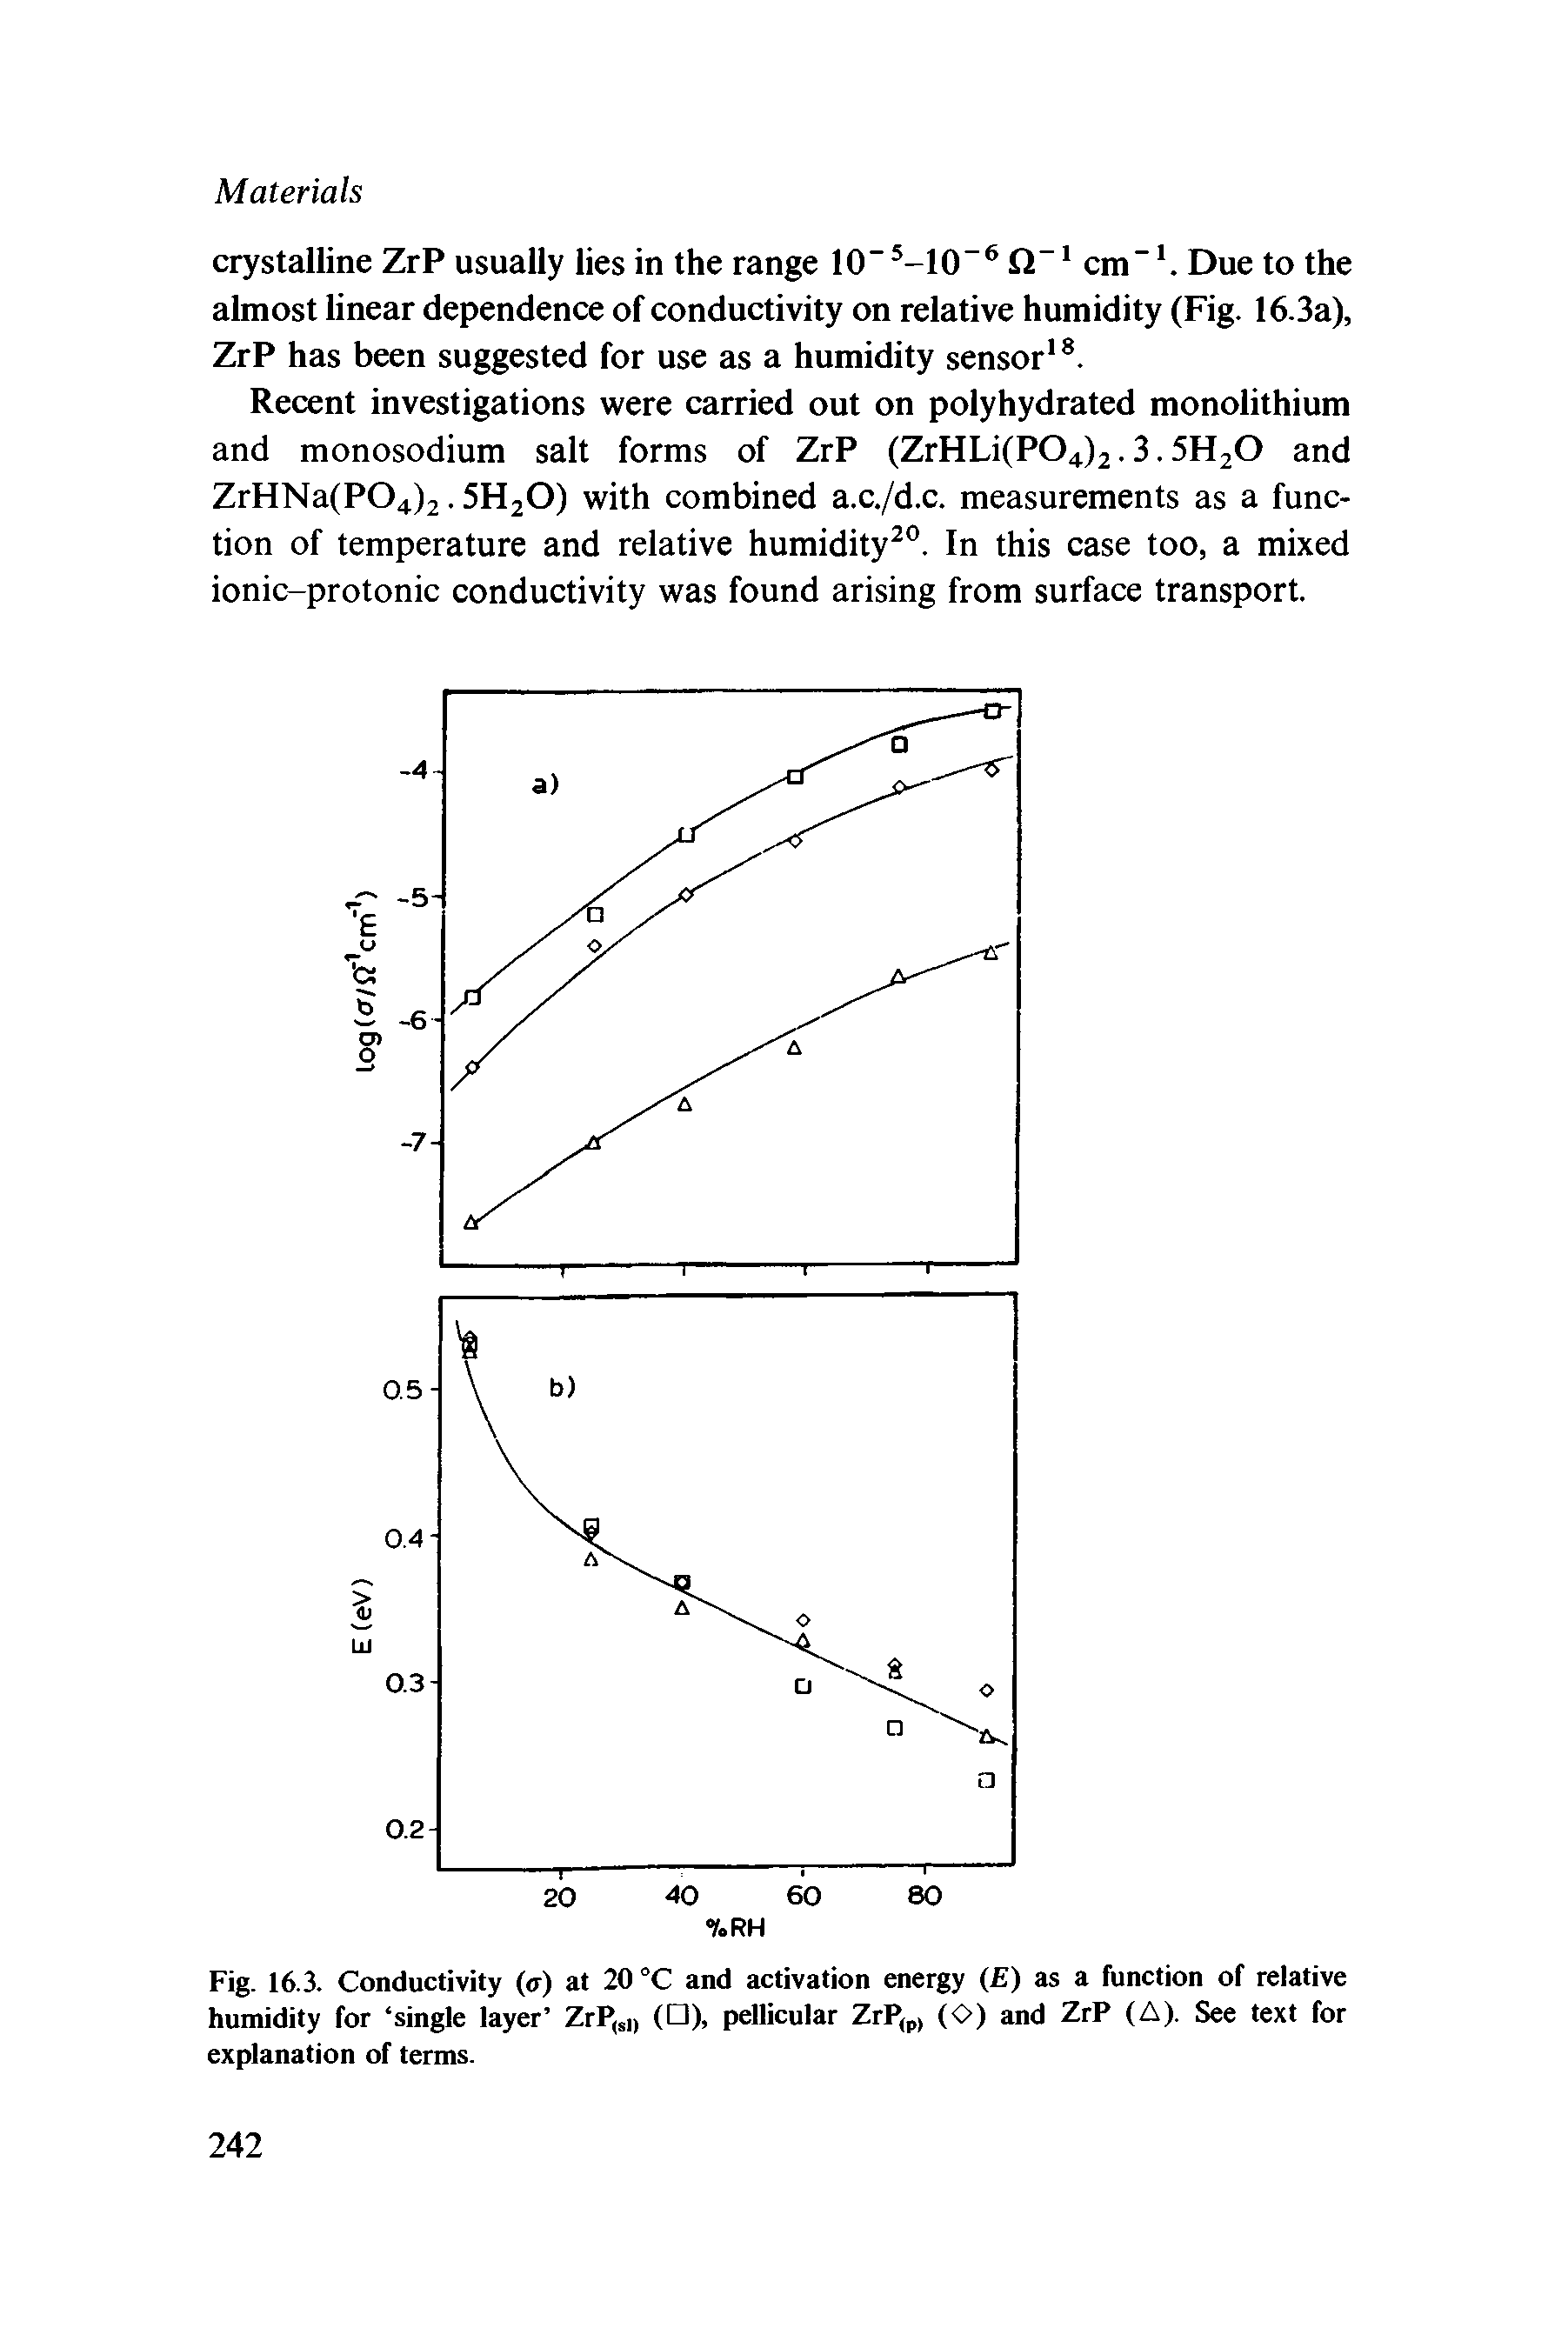 Fig. 16.3. Conductivity (u) at 20 °C and activation energy ( ) as a function of relative humidity for single layer ZrP,si, ( ), pellicular ZrP,p, (O) and ZrP (A). See text for explanation of terms.